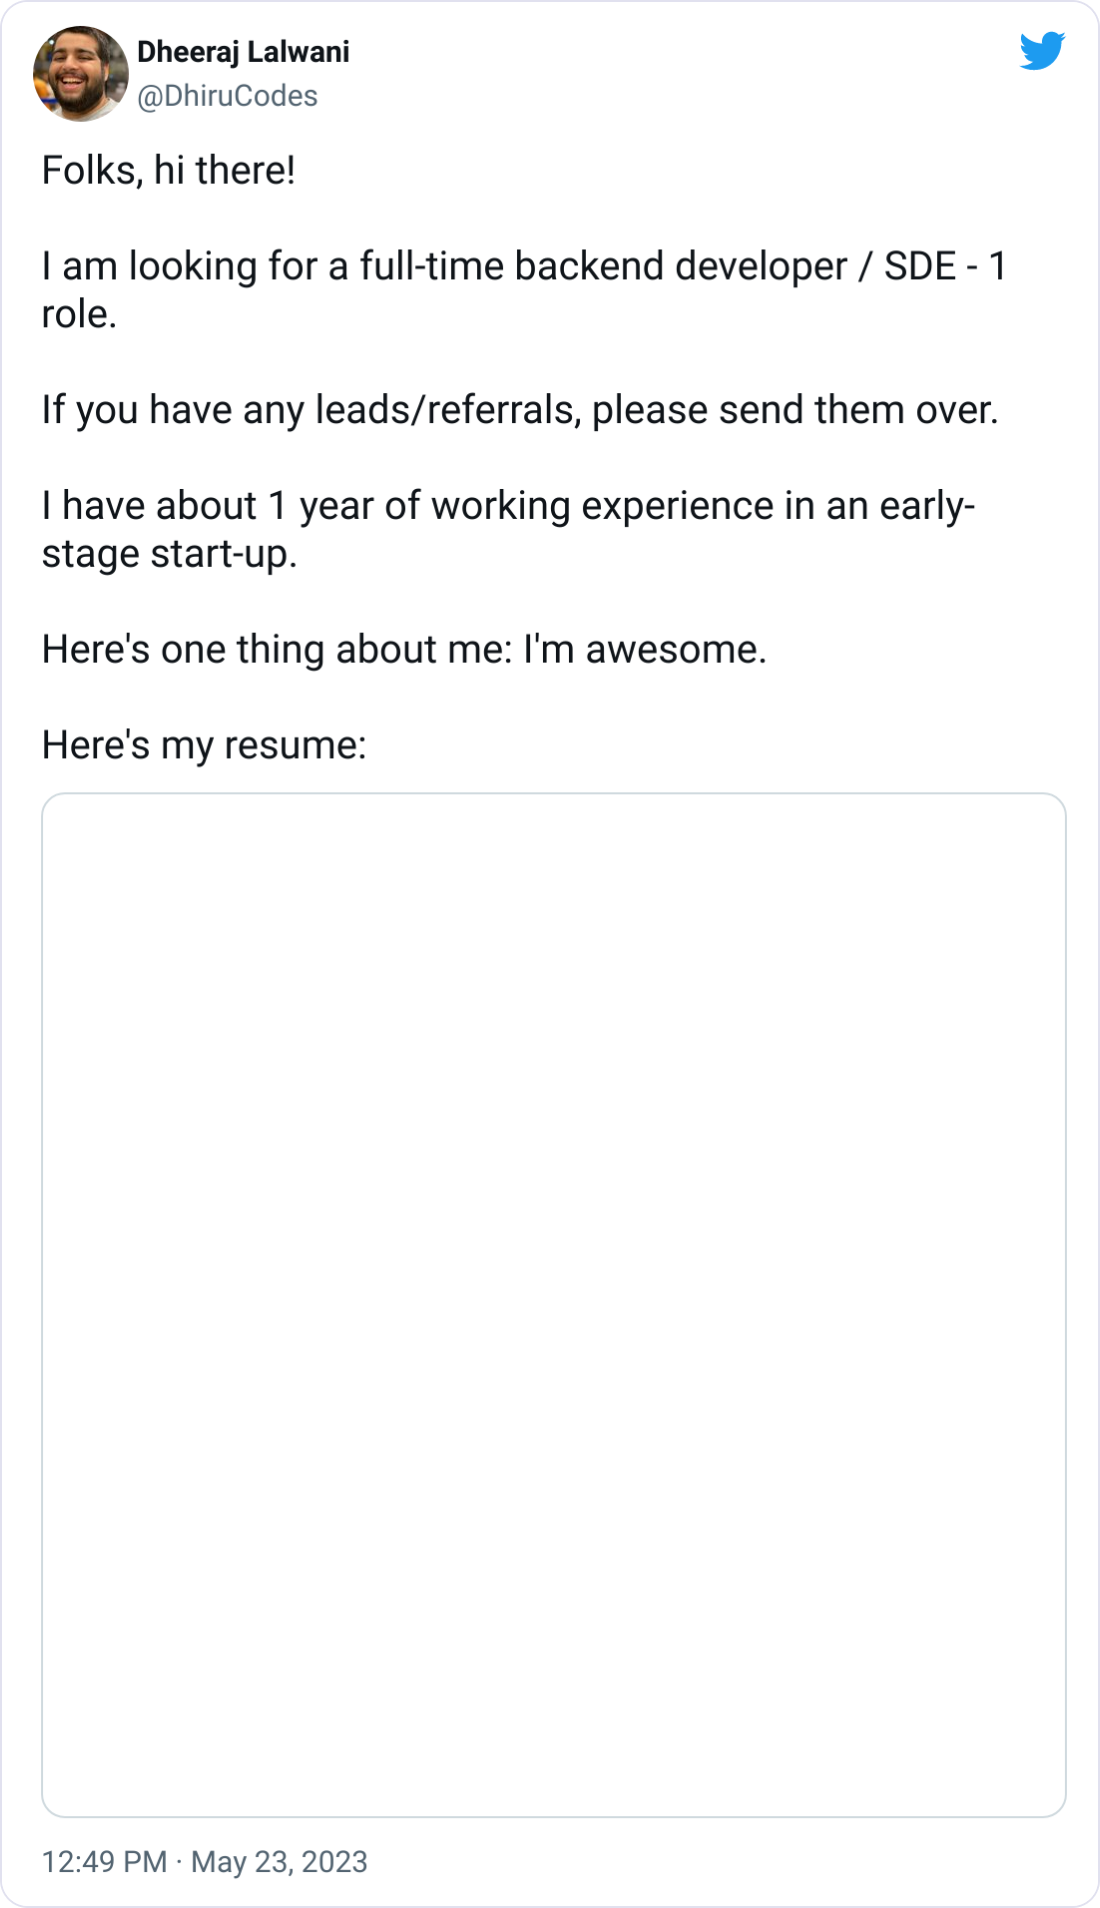  Dheeraj Lalwani @DhiruCodes Folks, hi there!  I am looking for a full-time backend developer / SDE - 1 role.  If you have any leads/referrals, please send them over.  I have about 1 year of working experience in an early-stage start-up.  Here's one thing about me: I'm awesome.  Here's my resume: